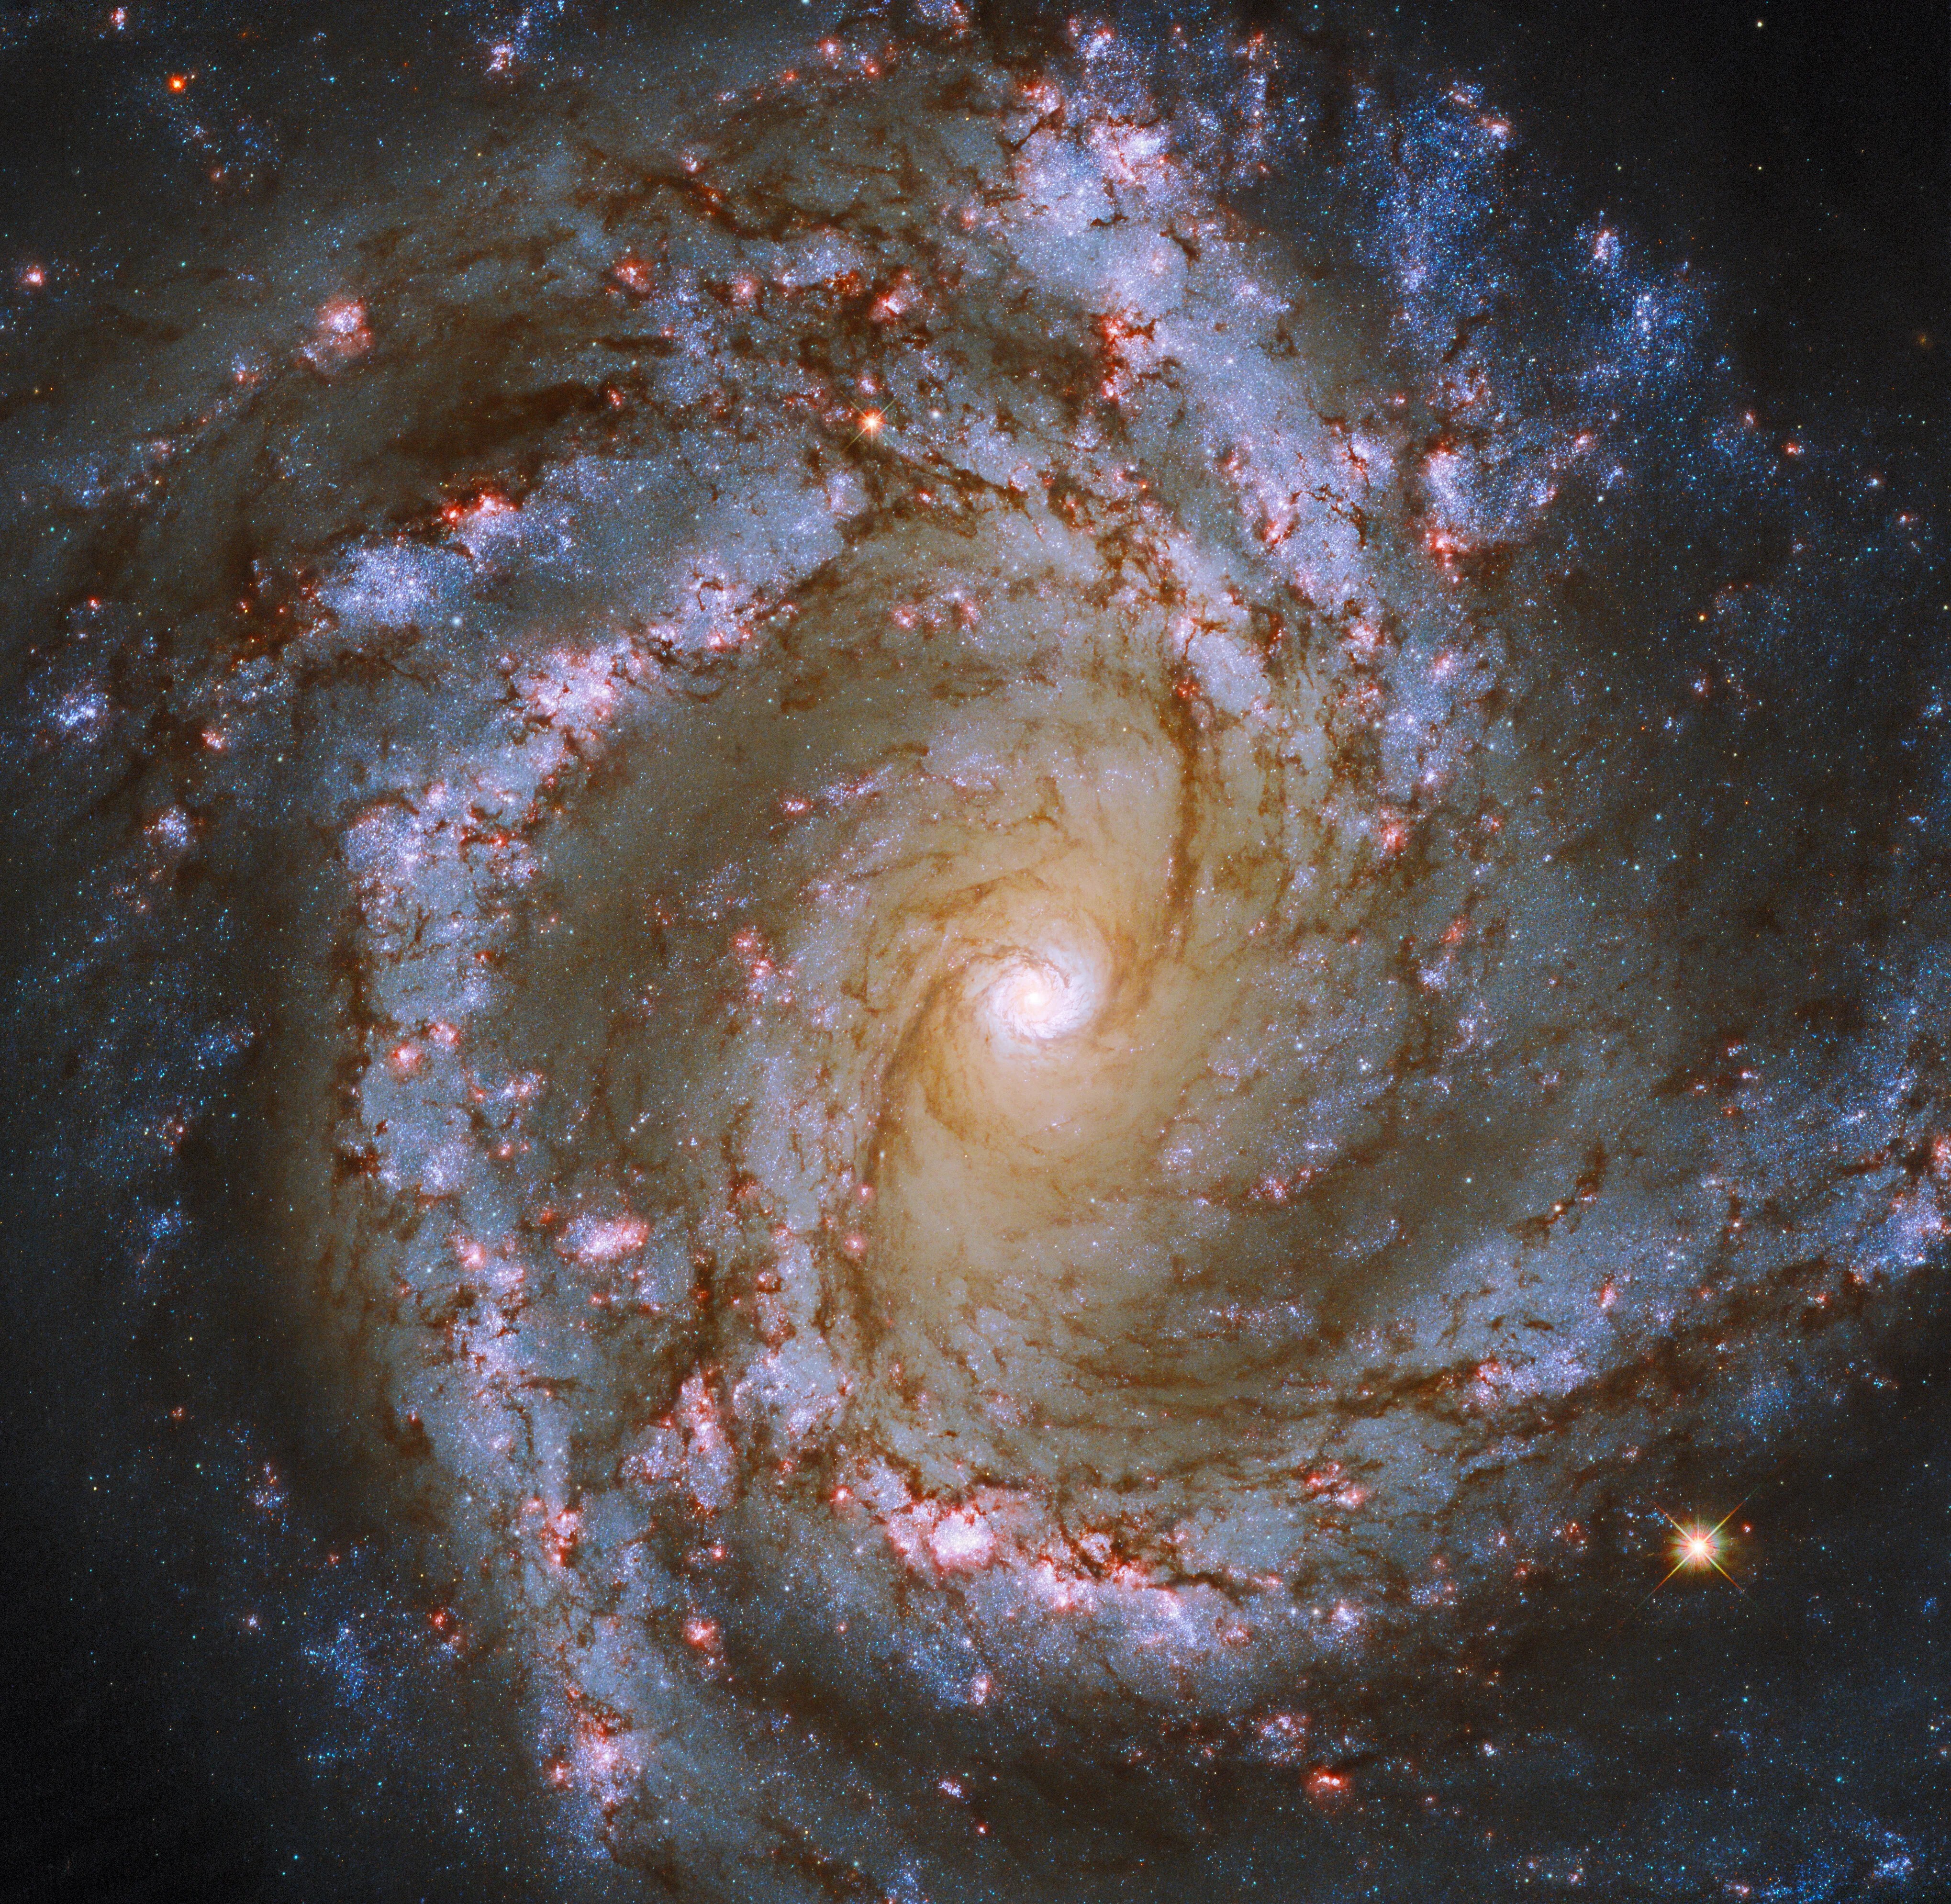 The luminous heart of the galaxy m61 dominates this image.